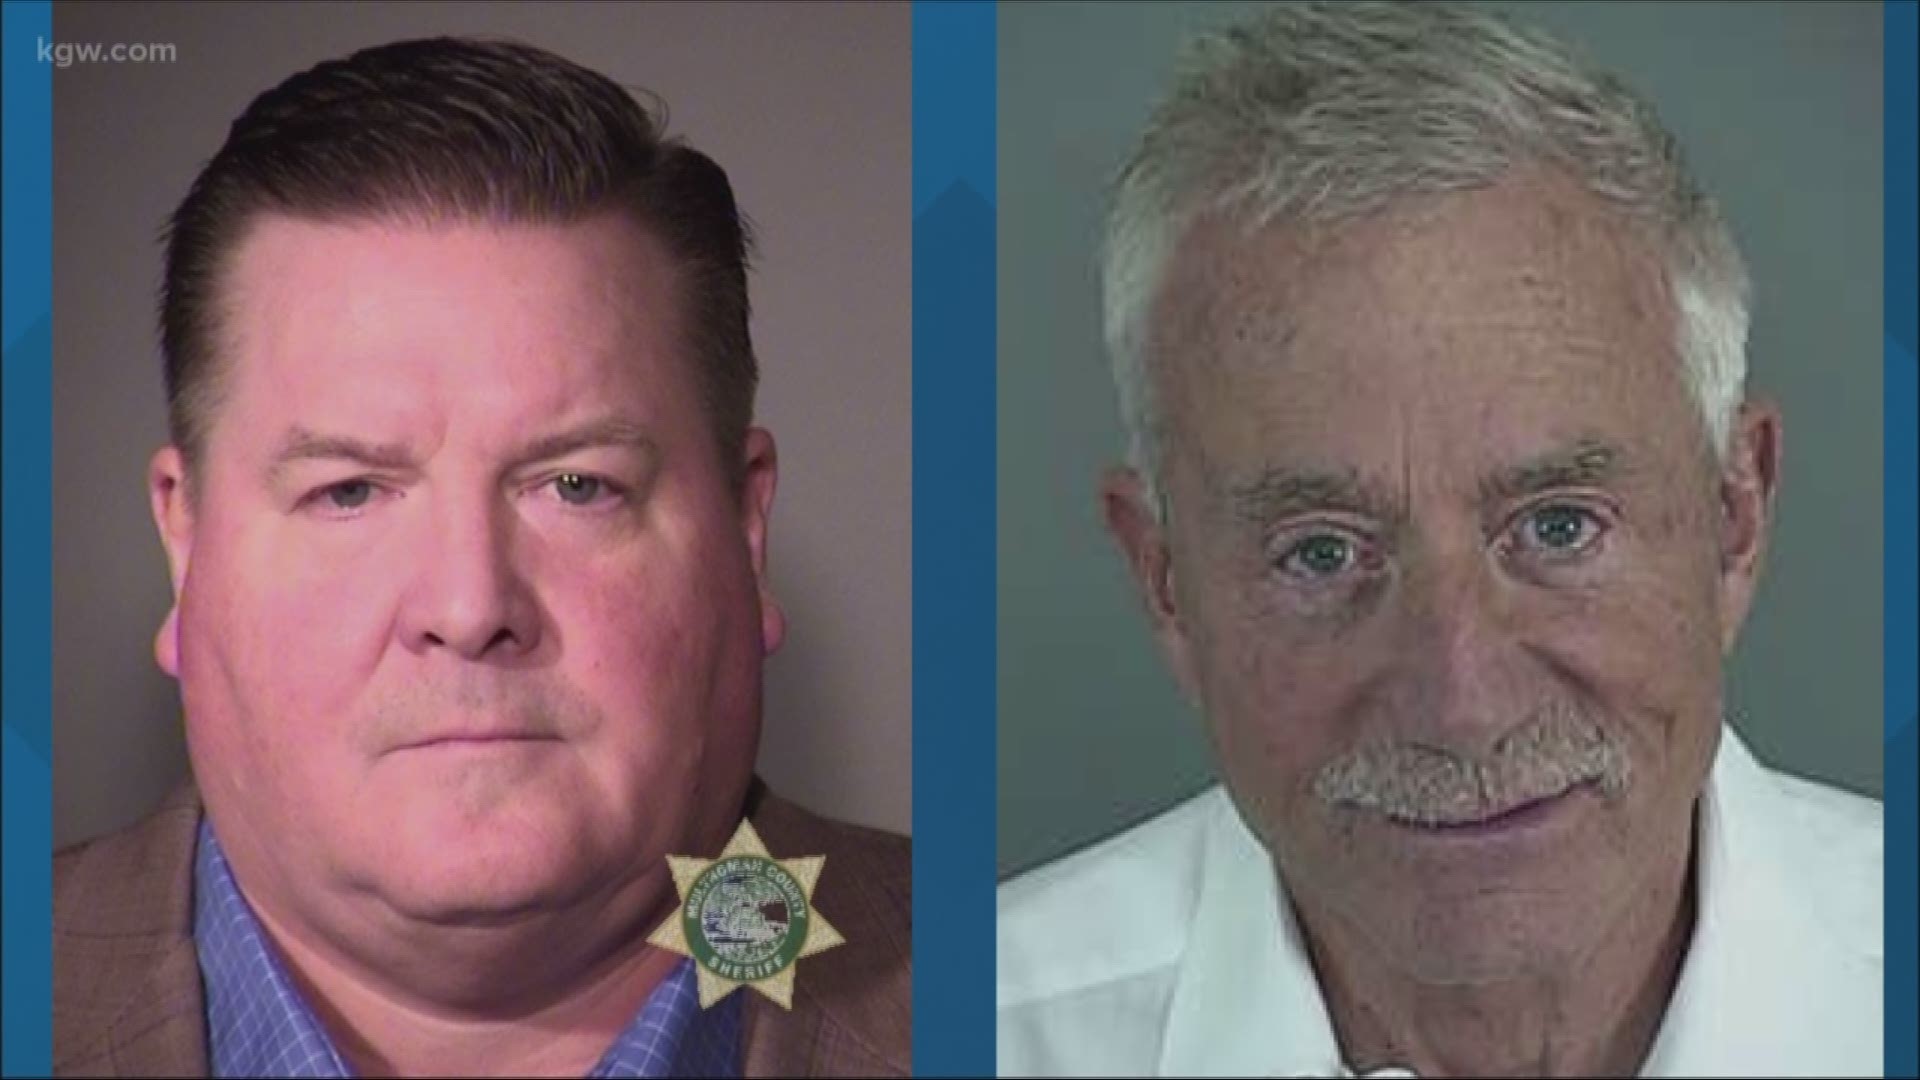 Prominent political fundraiser Terry Bean and his defense attorney were both arrested in Portland on Wednesday. They face felony charges of "computer crimes."